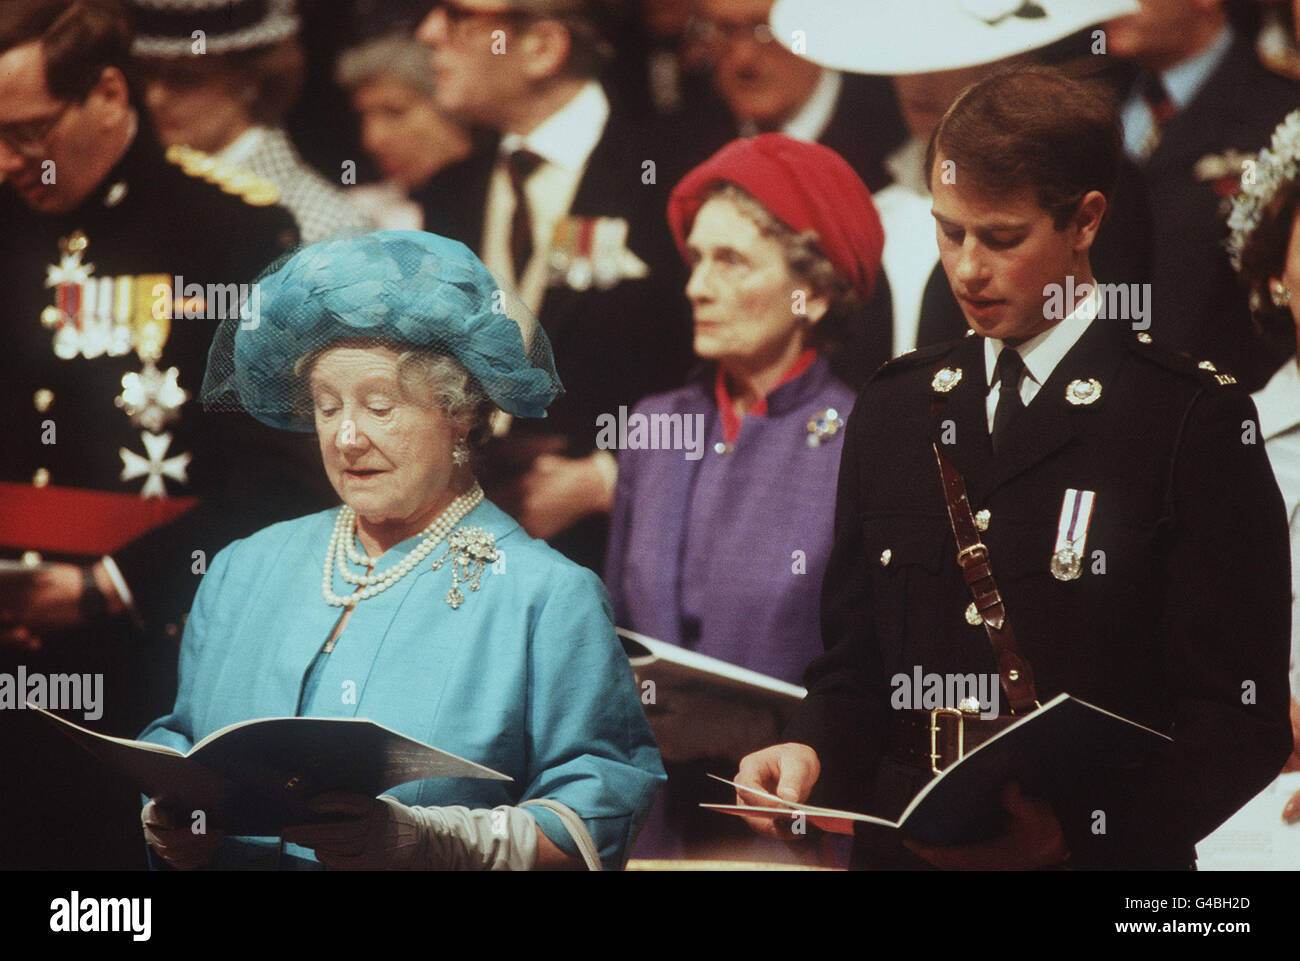 PA NEWS PHOTO 10/5/85 THE QUEEN MOTHER, PRINCESS ALICE (BEHIND) AND PRINCE EDWARD AT A COMMEMORATION SERVICE TO MARK THE 40TH ANNIVERSARY OF VE DAY AT WESTMINSTER ABBEY, LONDON Stock Photo